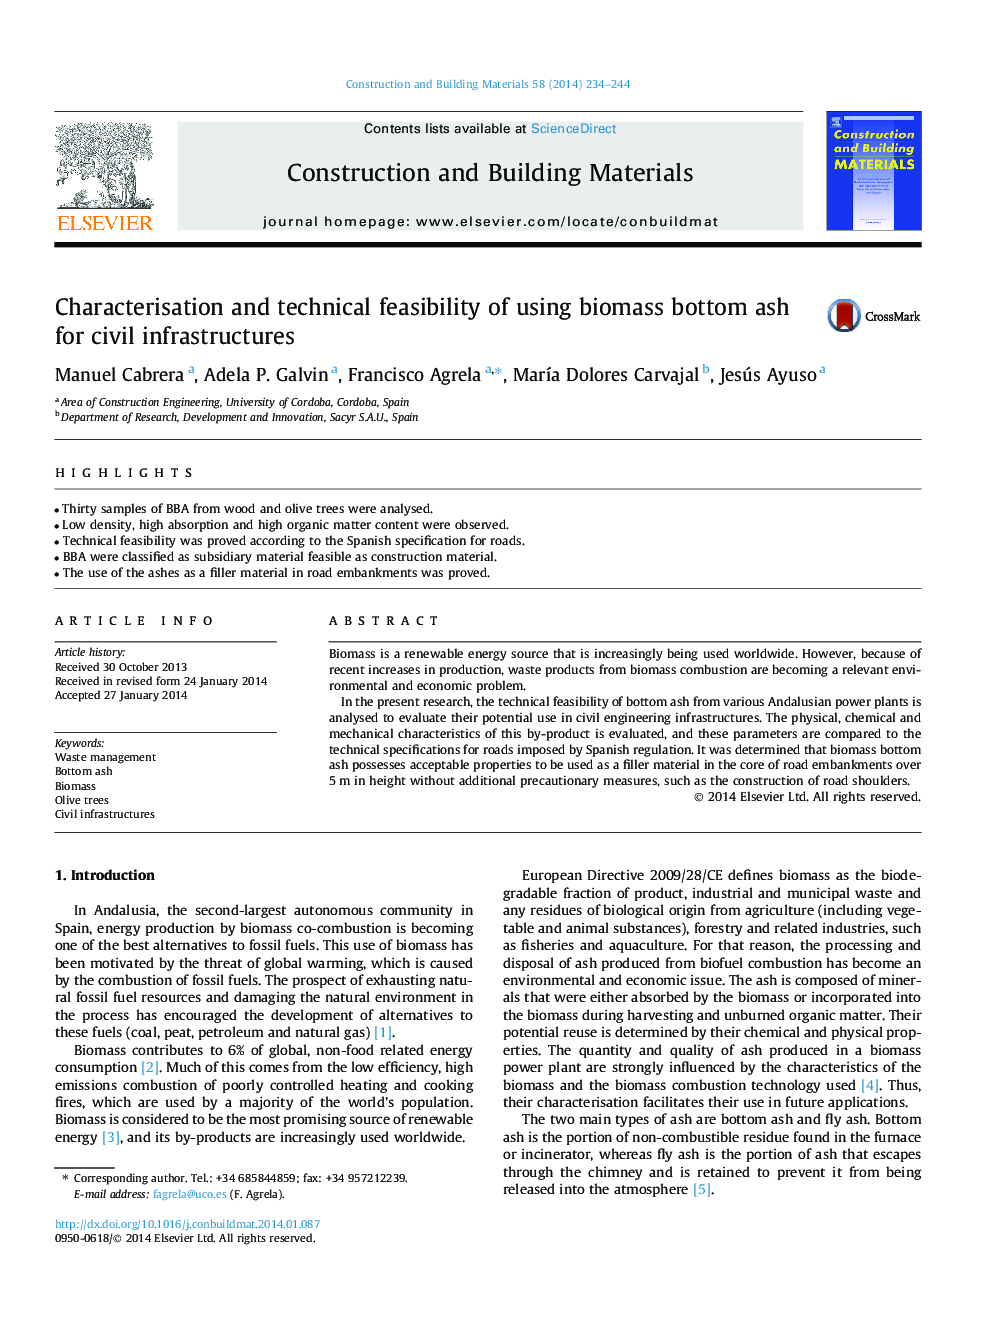 Characterisation and technical feasibility of using biomass bottom ash for civil infrastructures